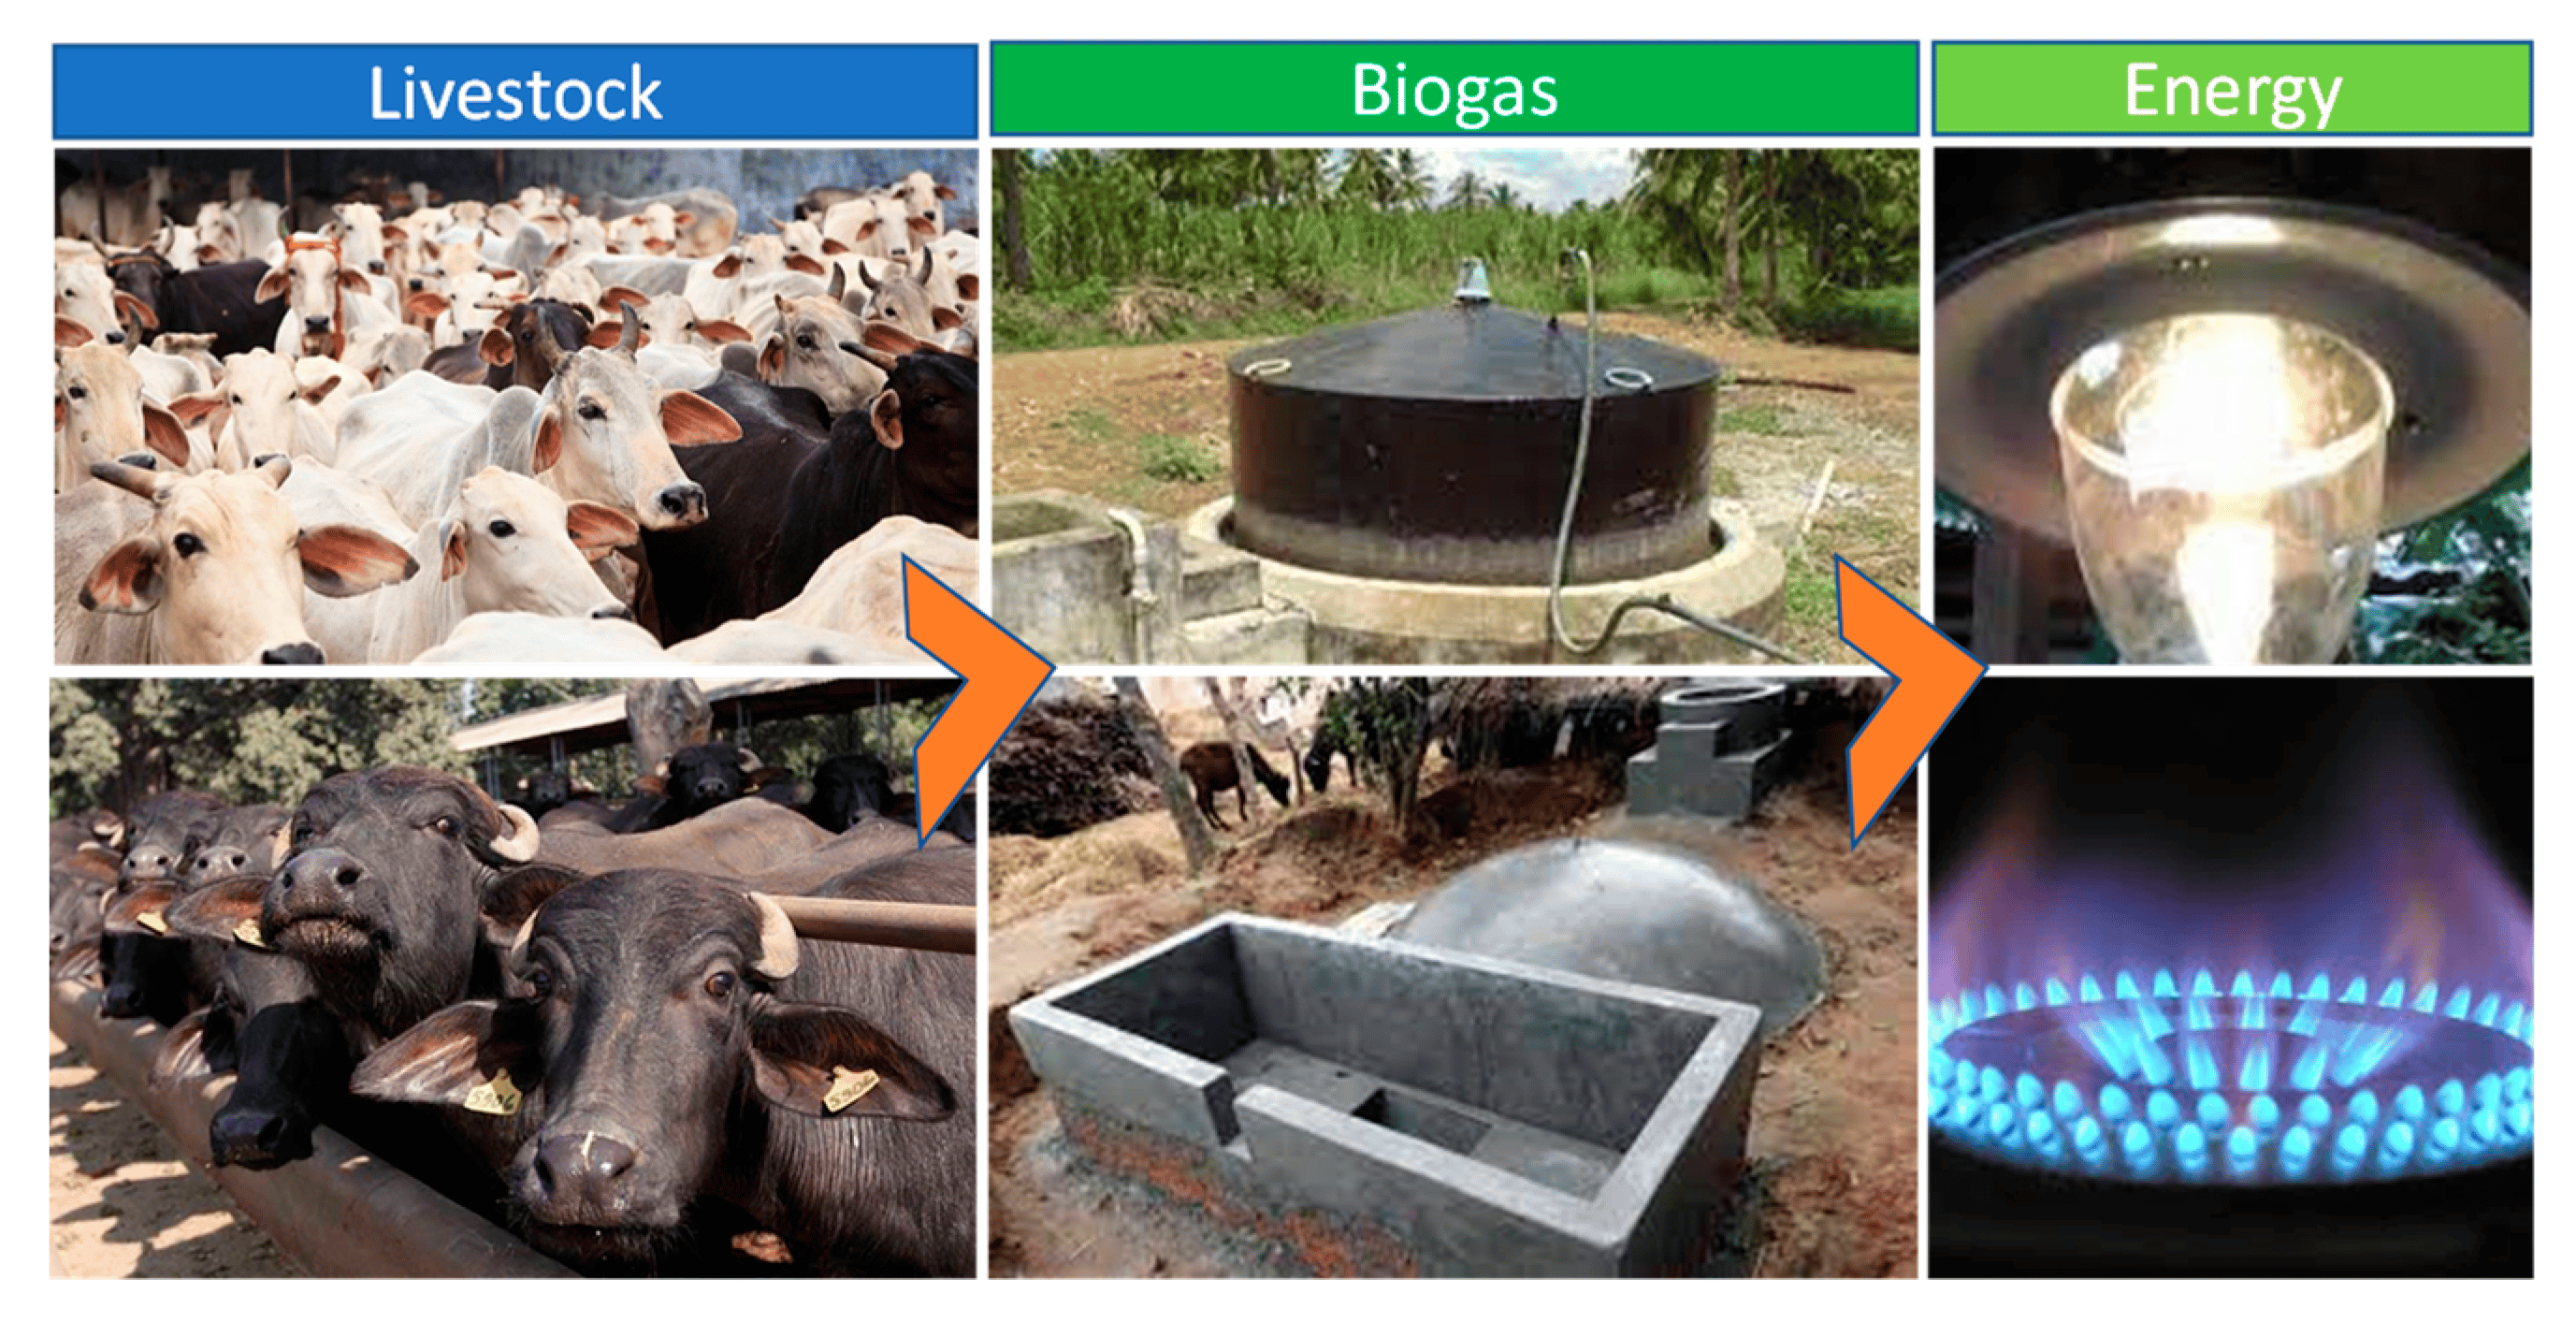 Irish farmers turn cow dung into digital gold: How Bitcoin is mined using biogas